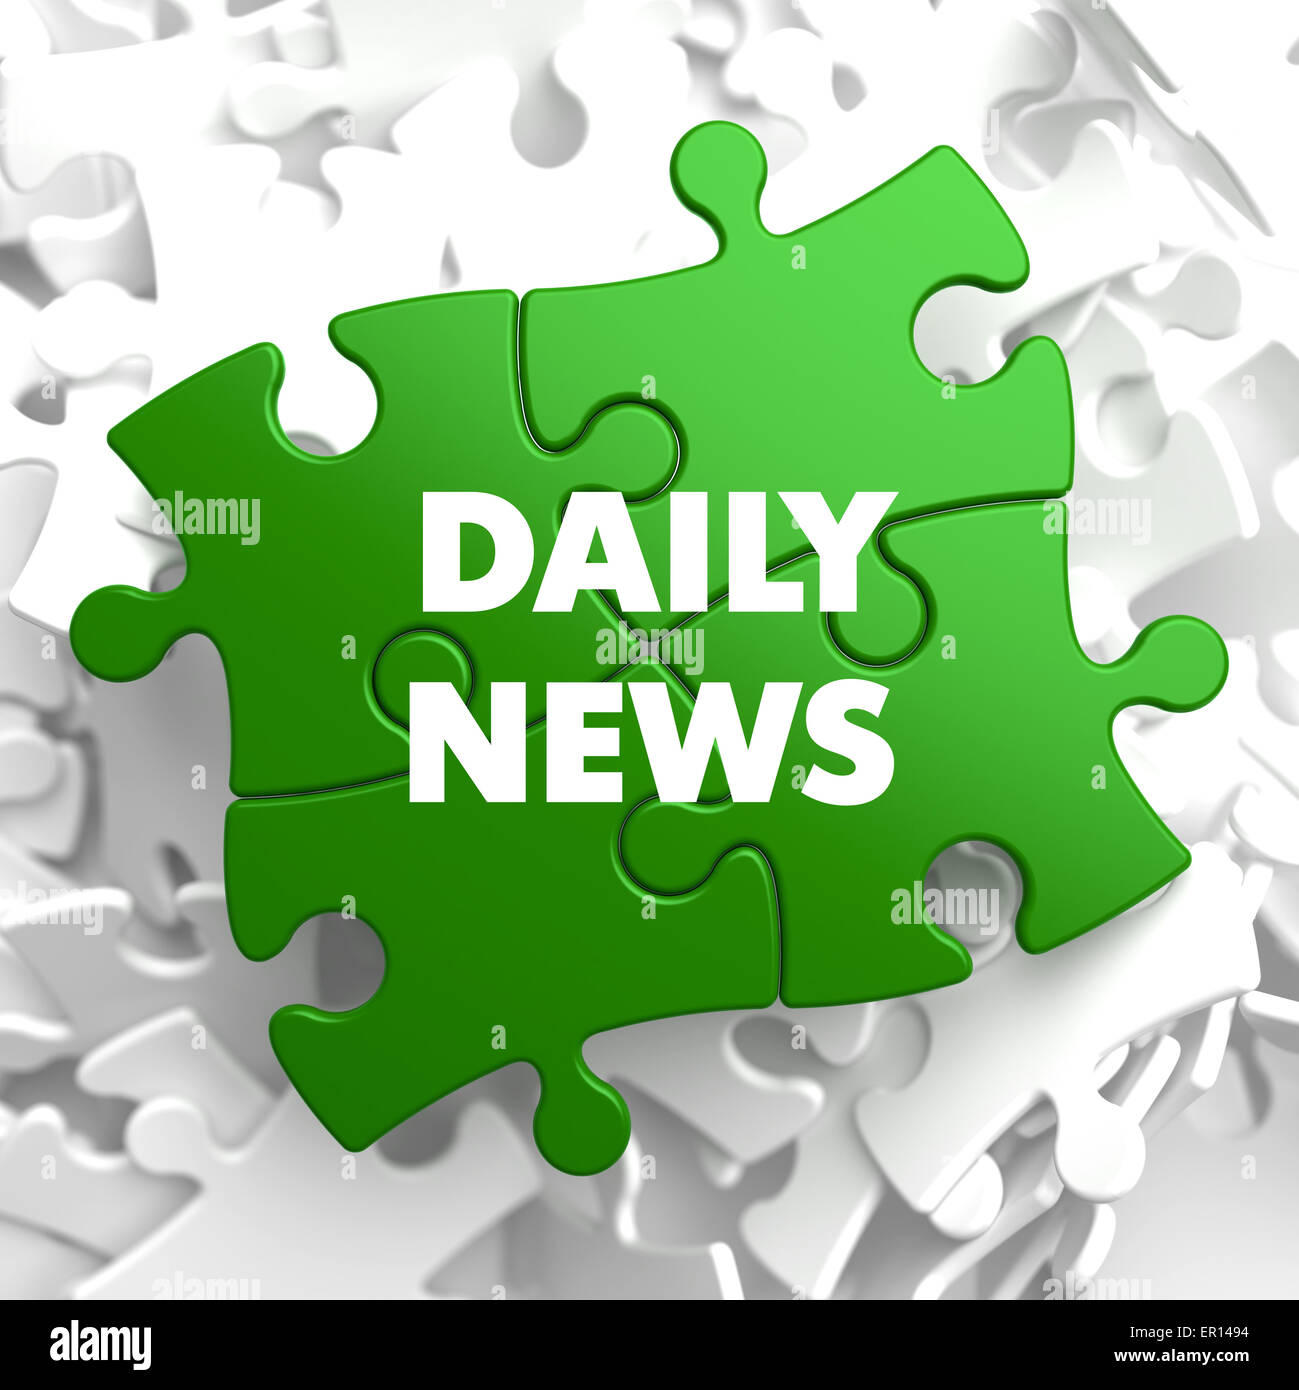 Daily News on Green Puzzle. Stock Photo